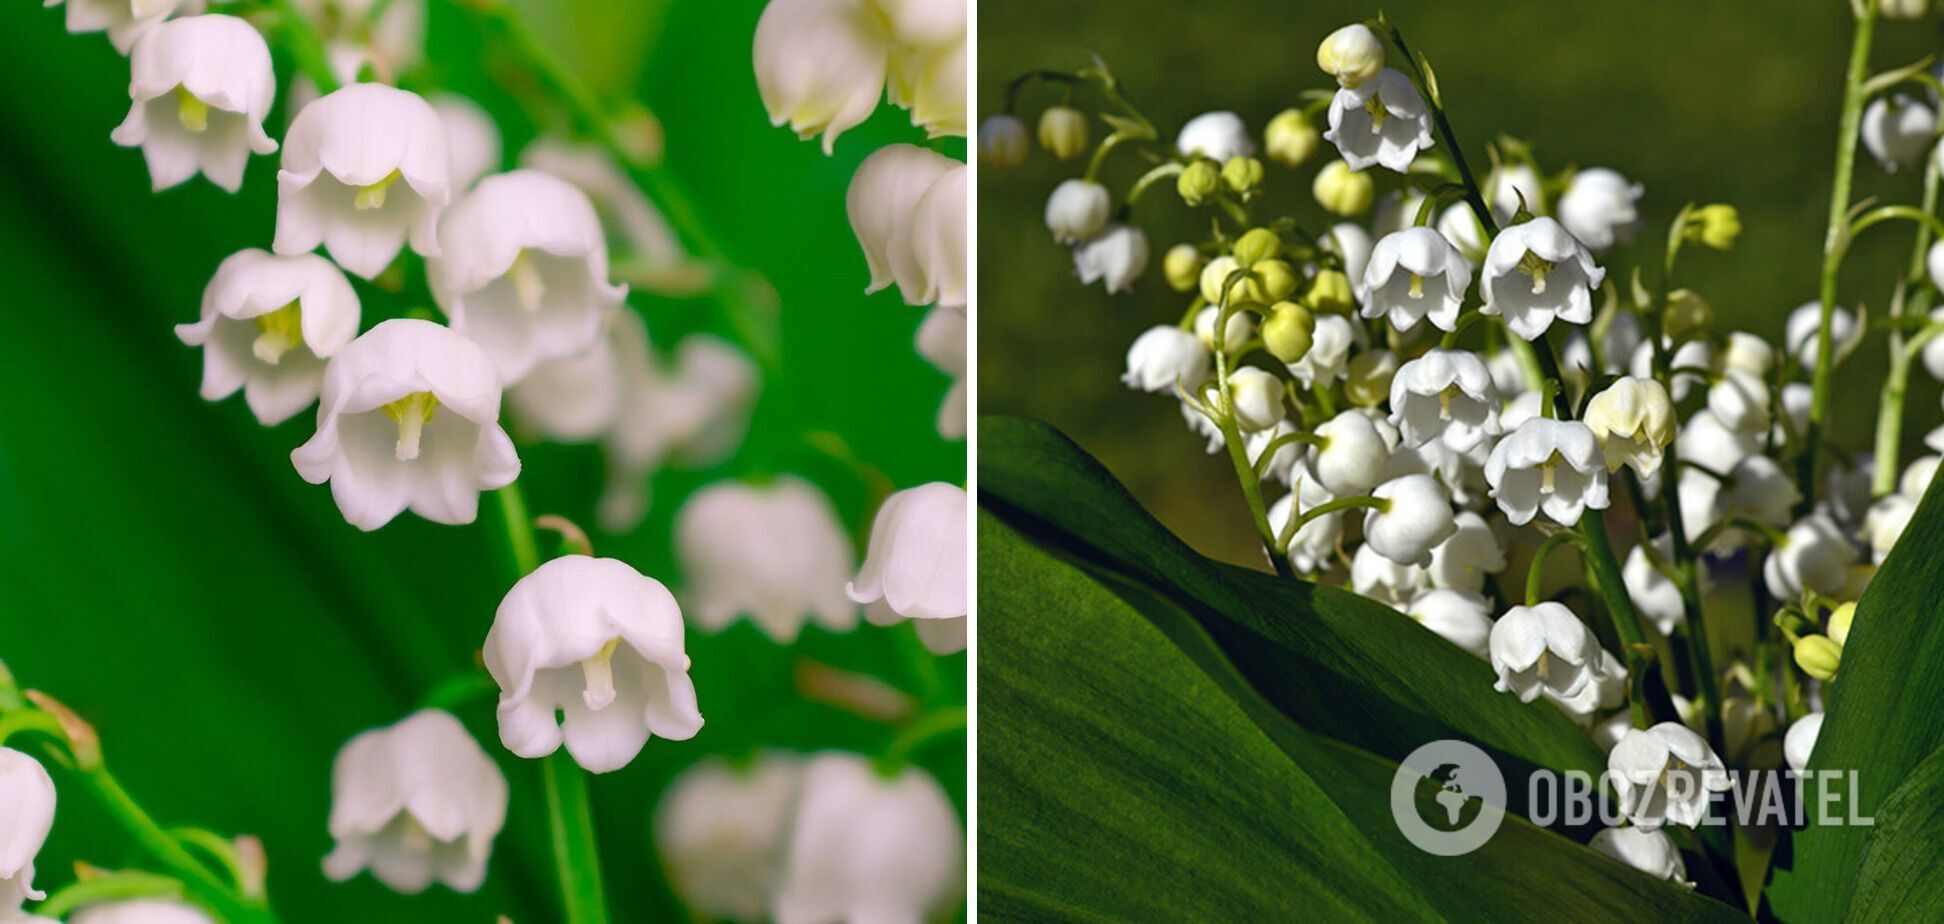 Be careful: which flowers for the garden are actually poisonous